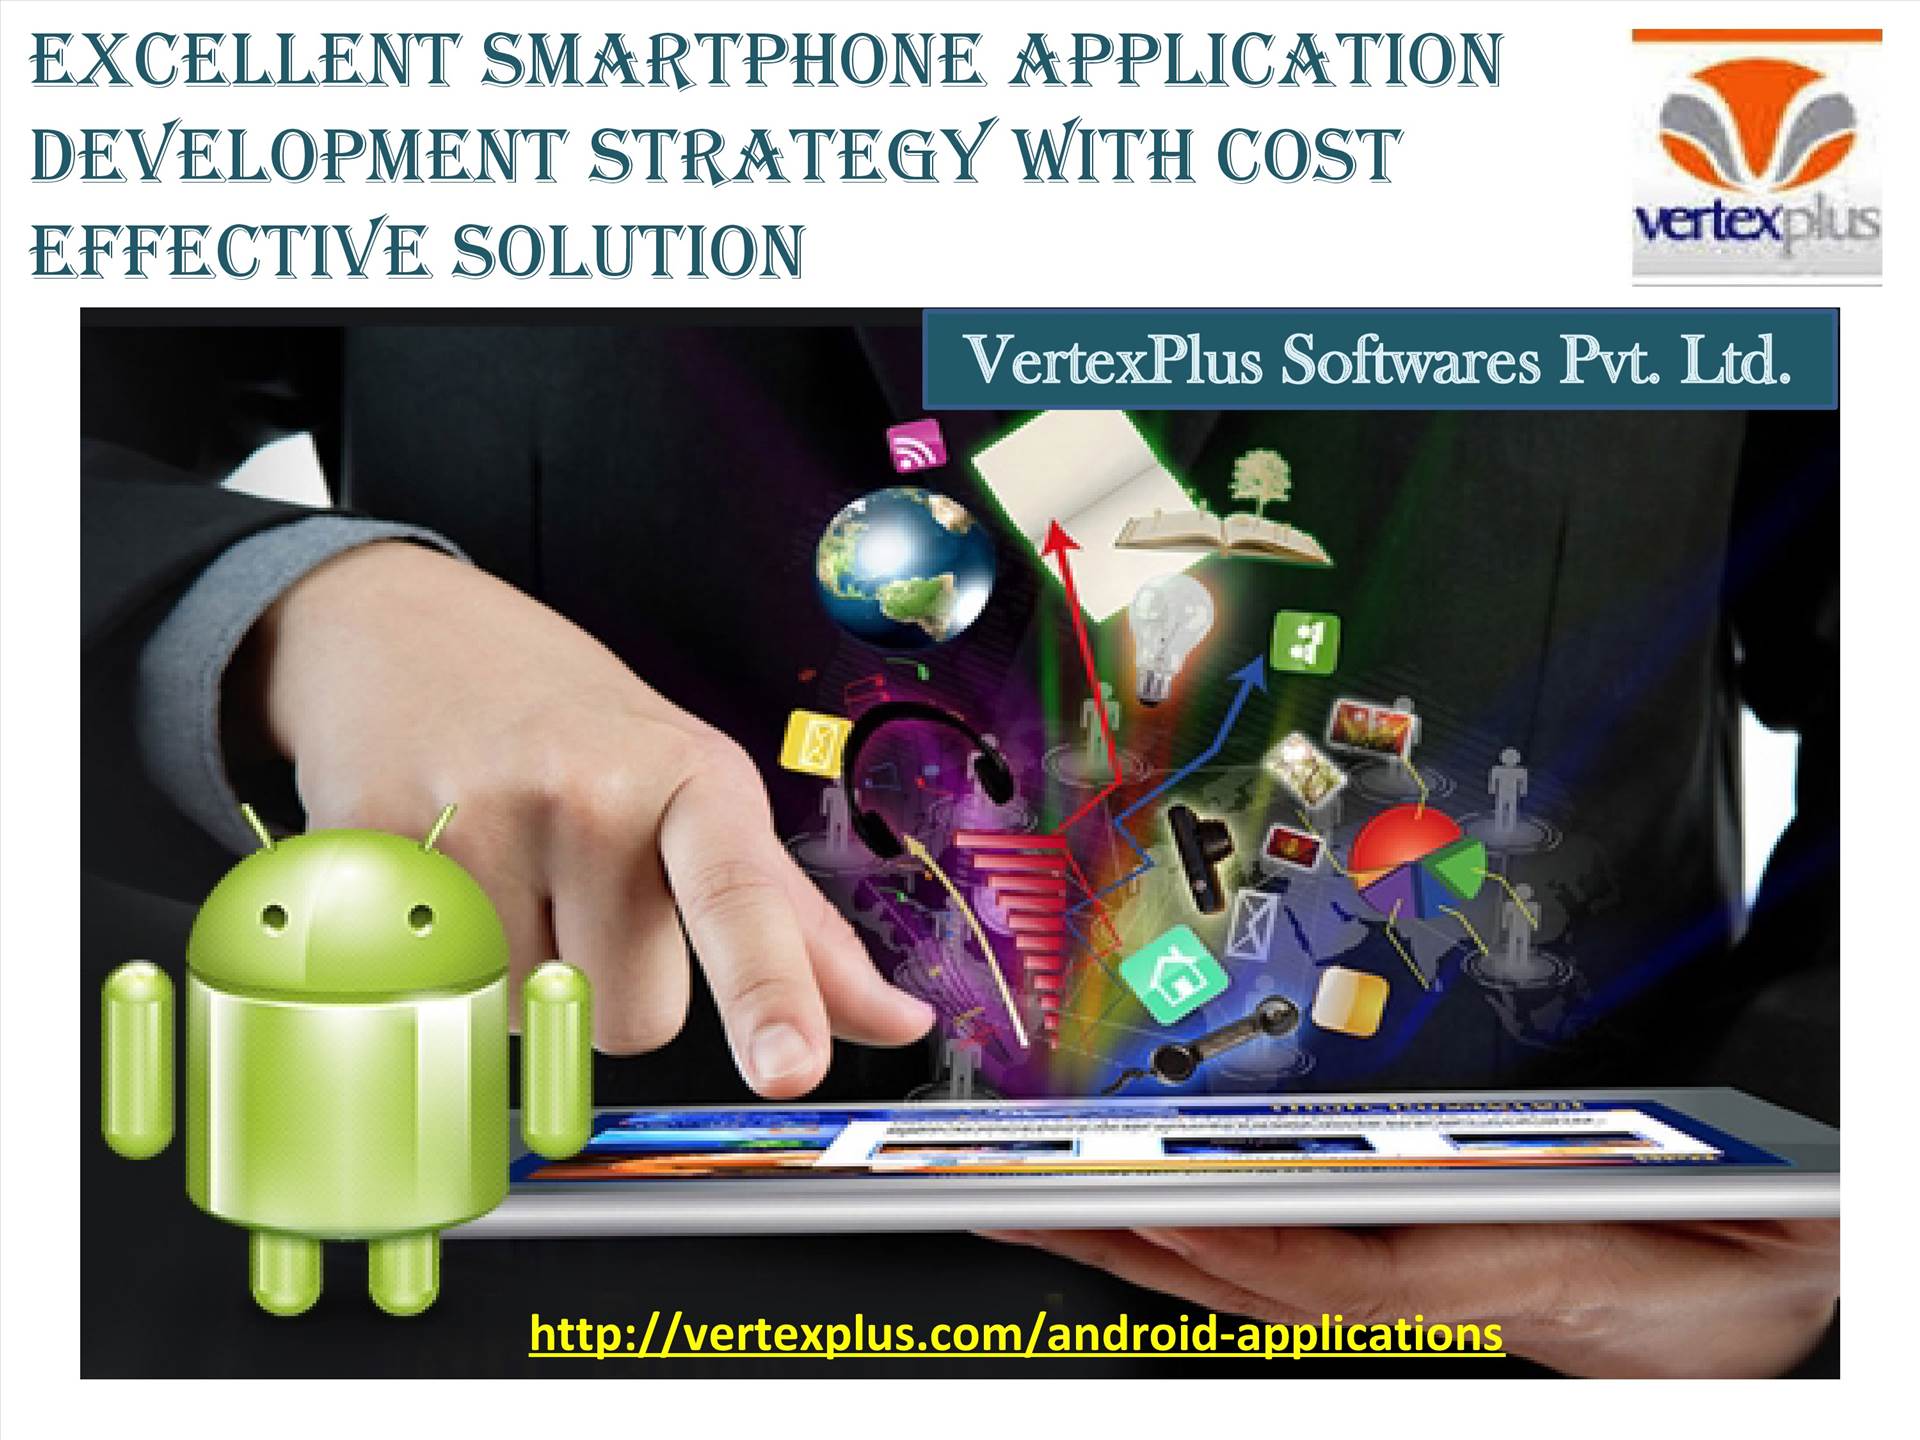 Excellent Smartphone Application Development Strategy with cost effective solution  by vertexplus